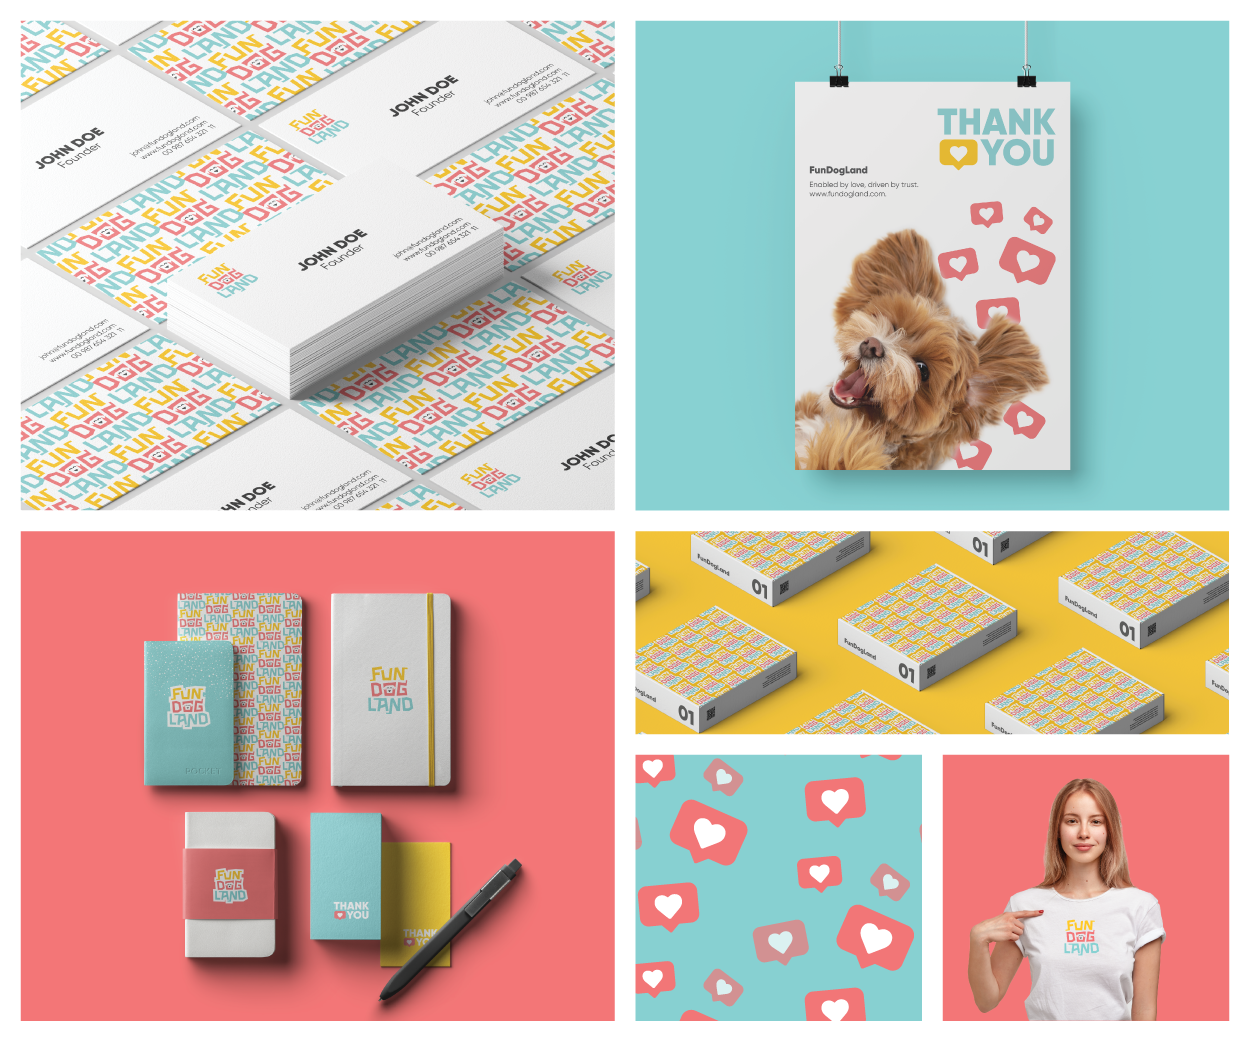 FunDogLand – community, marketplace and facilities for dogs and their owners Brand Image Design